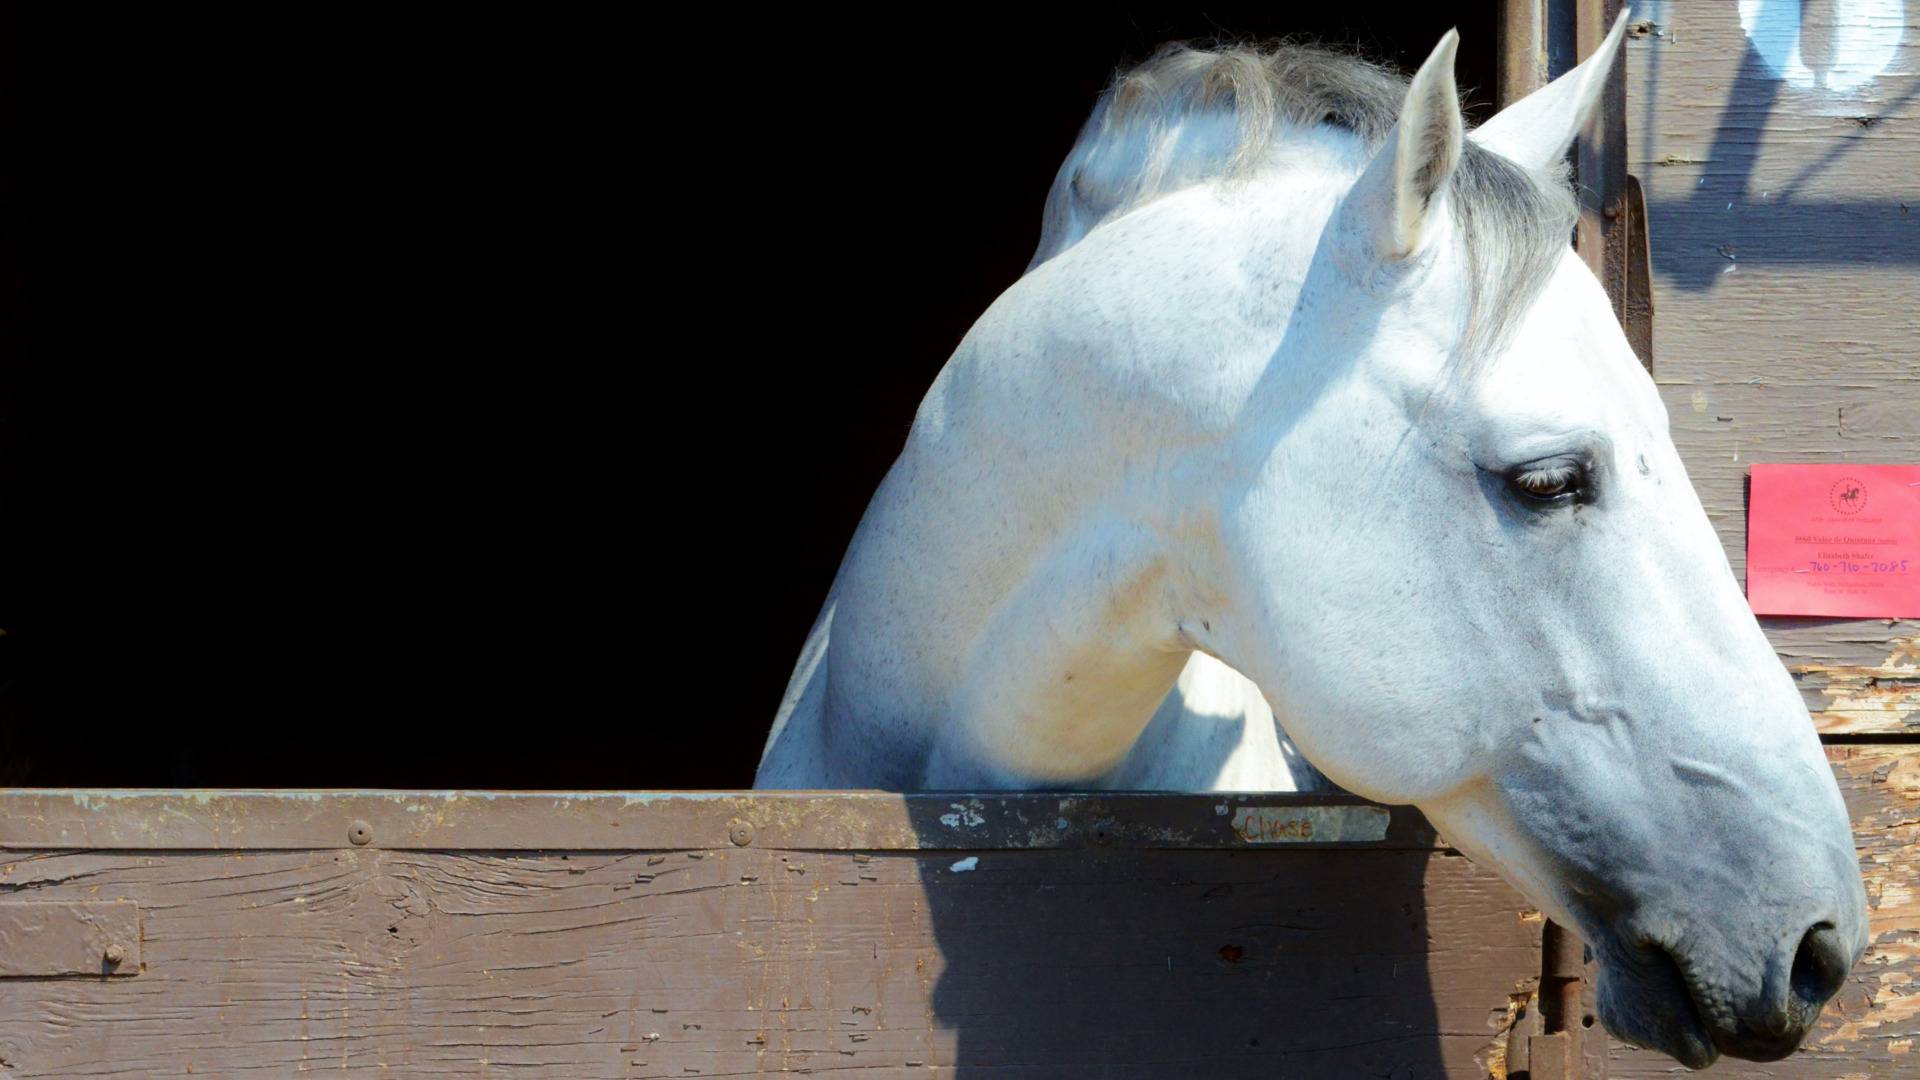 What Buying a Horse Taught Me About a Company's Vision